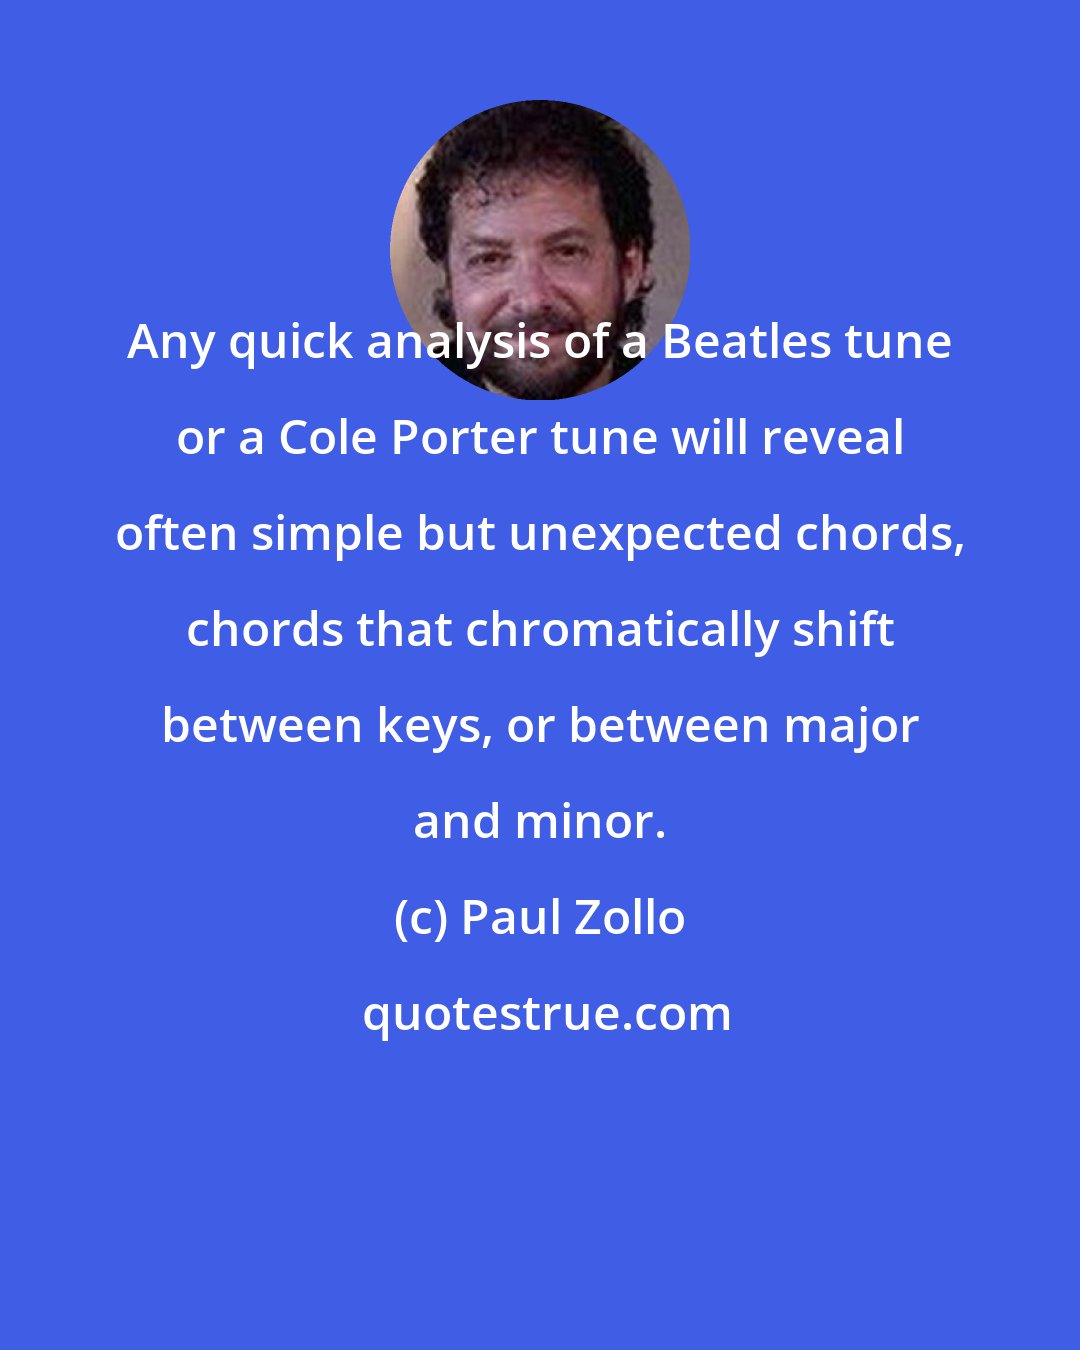 Paul Zollo: Any quick analysis of a Beatles tune or a Cole Porter tune will reveal often simple but unexpected chords, chords that chromatically shift between keys, or between major and minor.